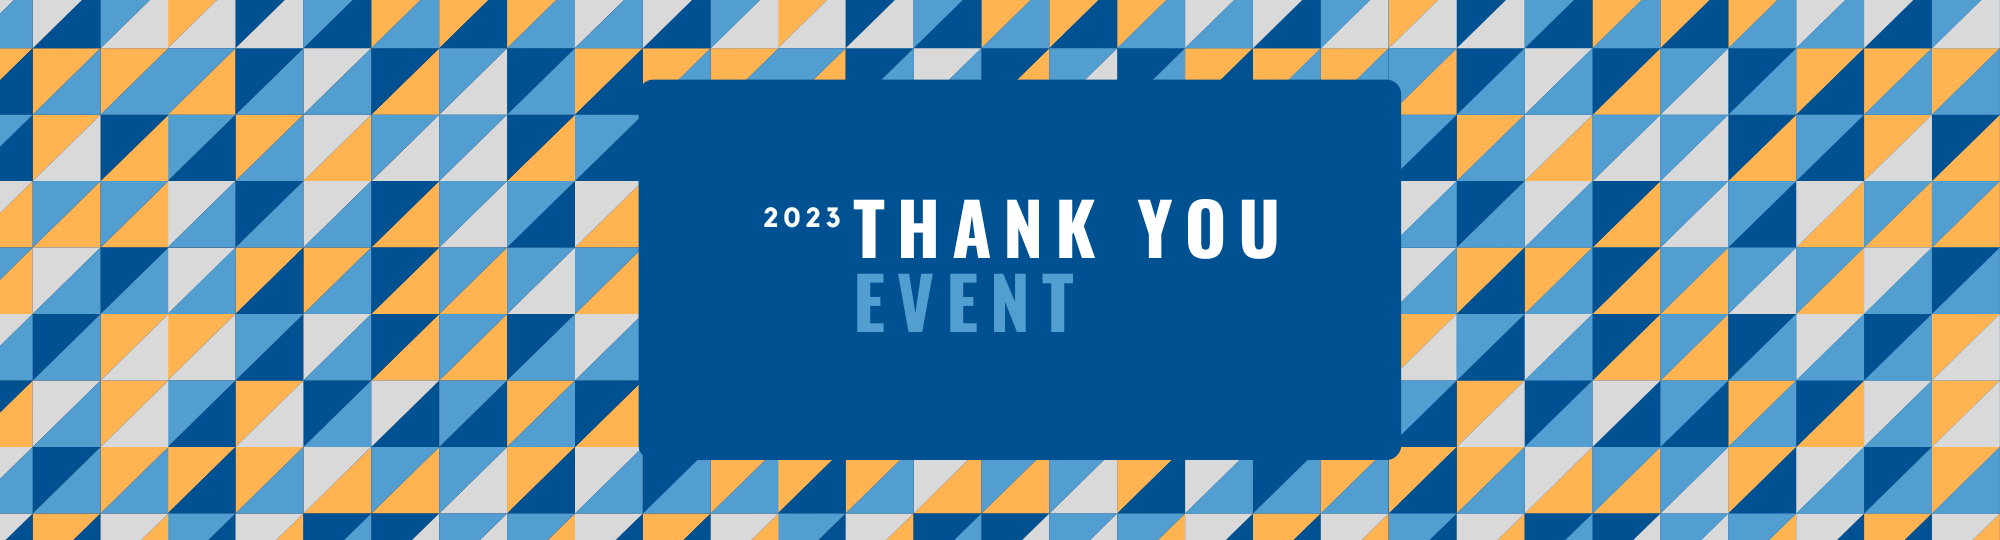 2023 Thank You Event